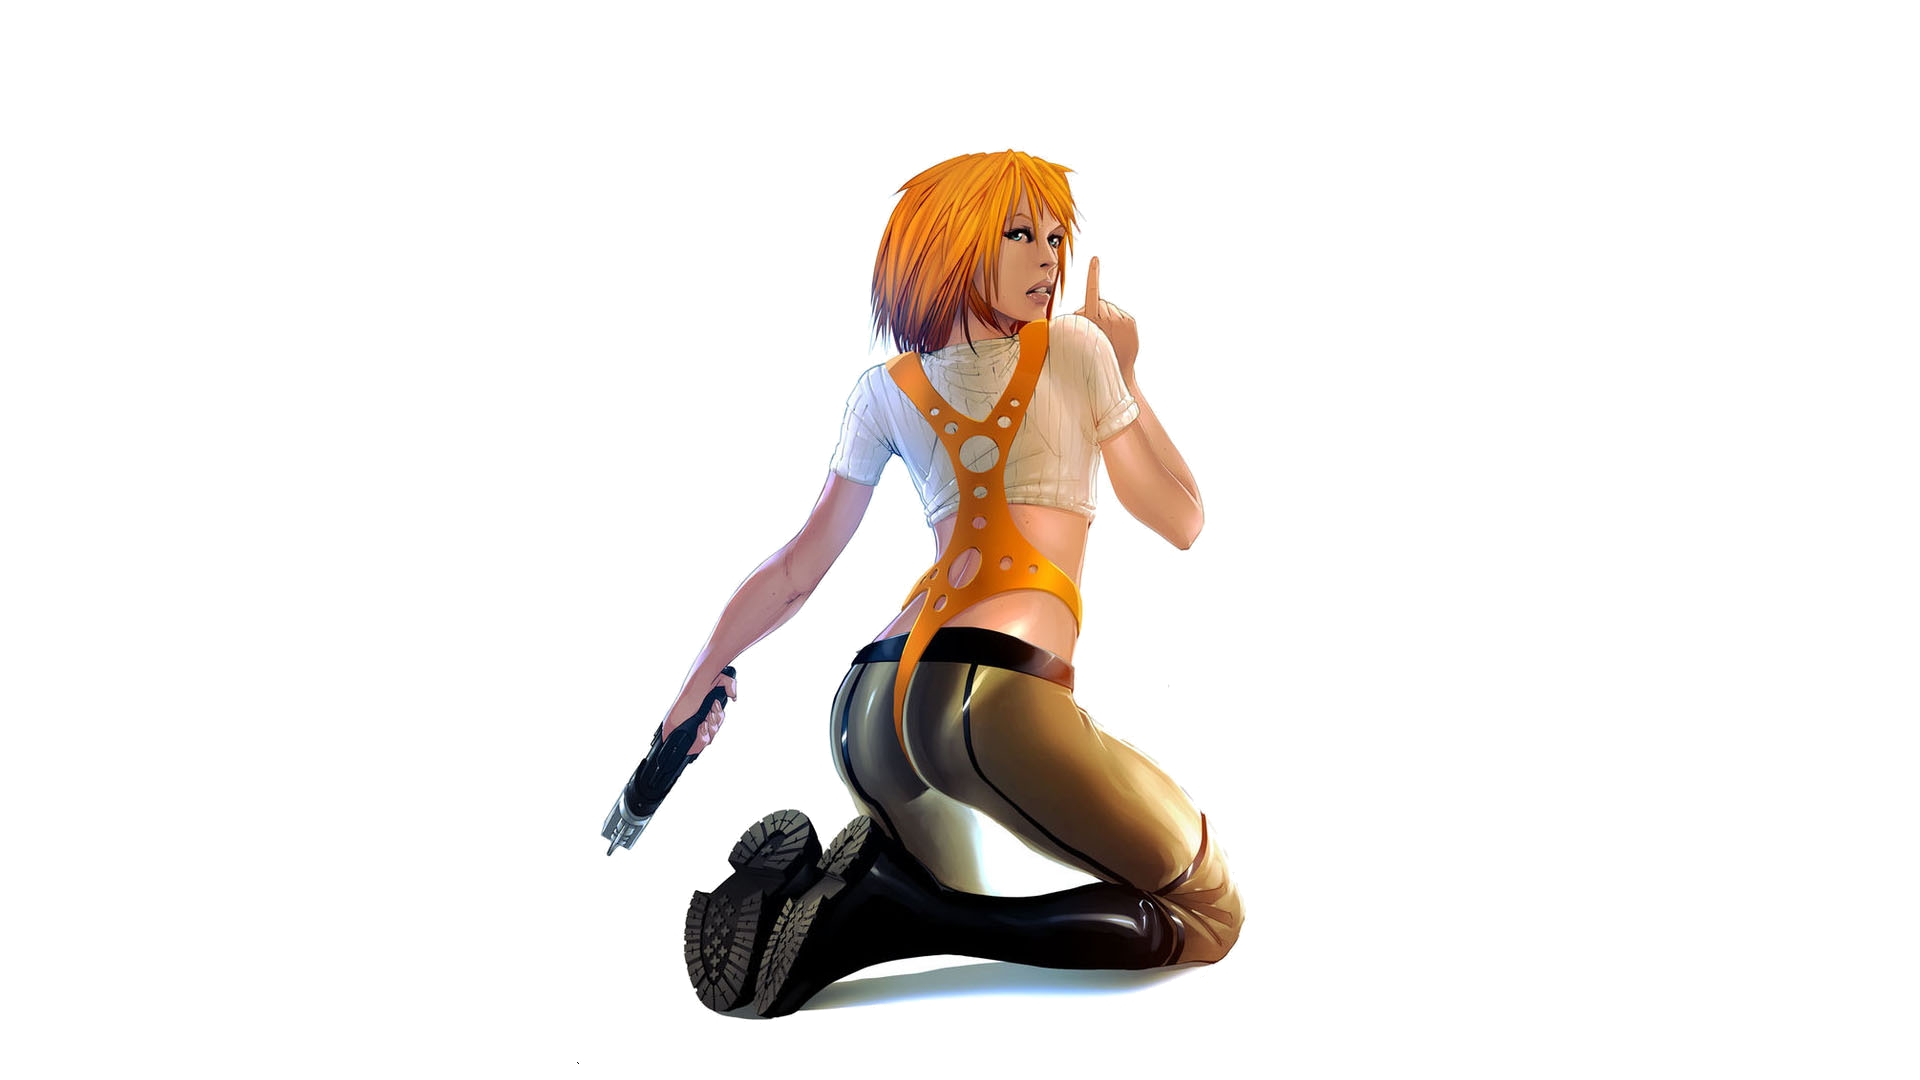 Leeloo The Fifth Element 1920x1080